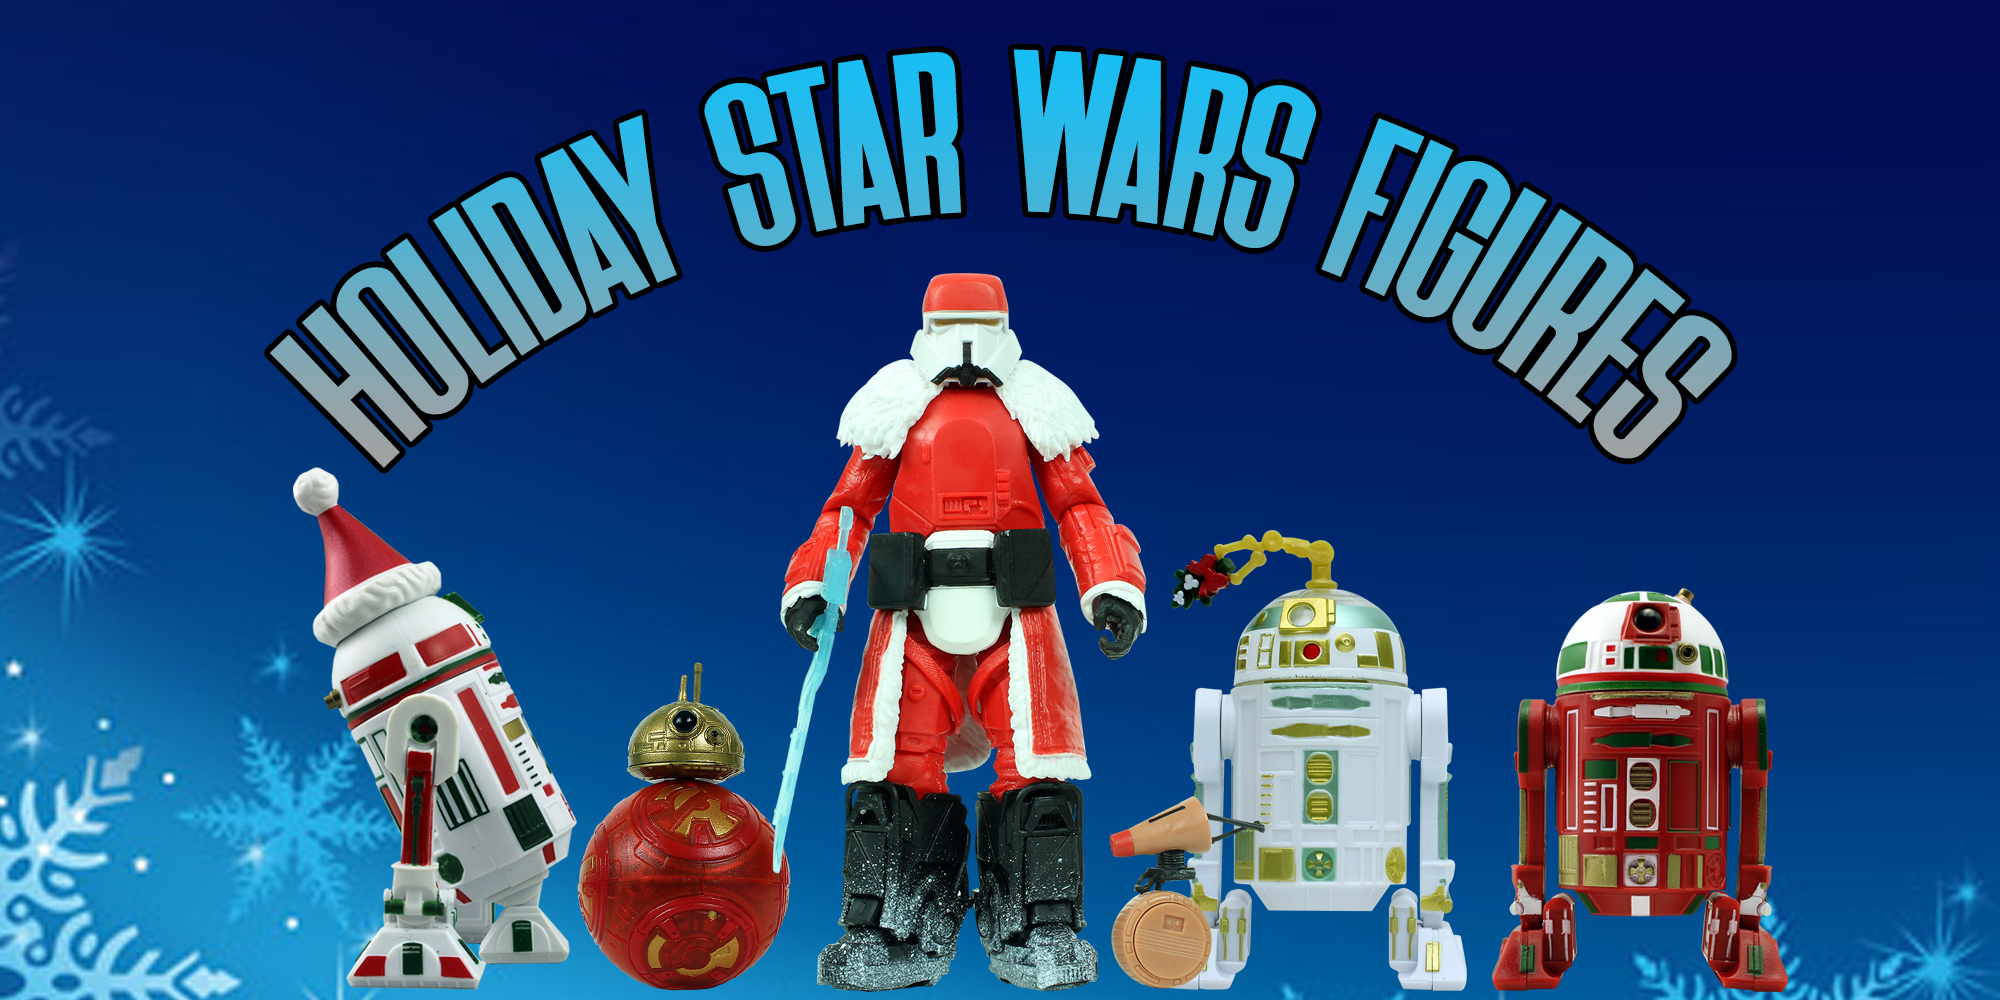 Holiday Star Wars Figures | Dedicated Site Section